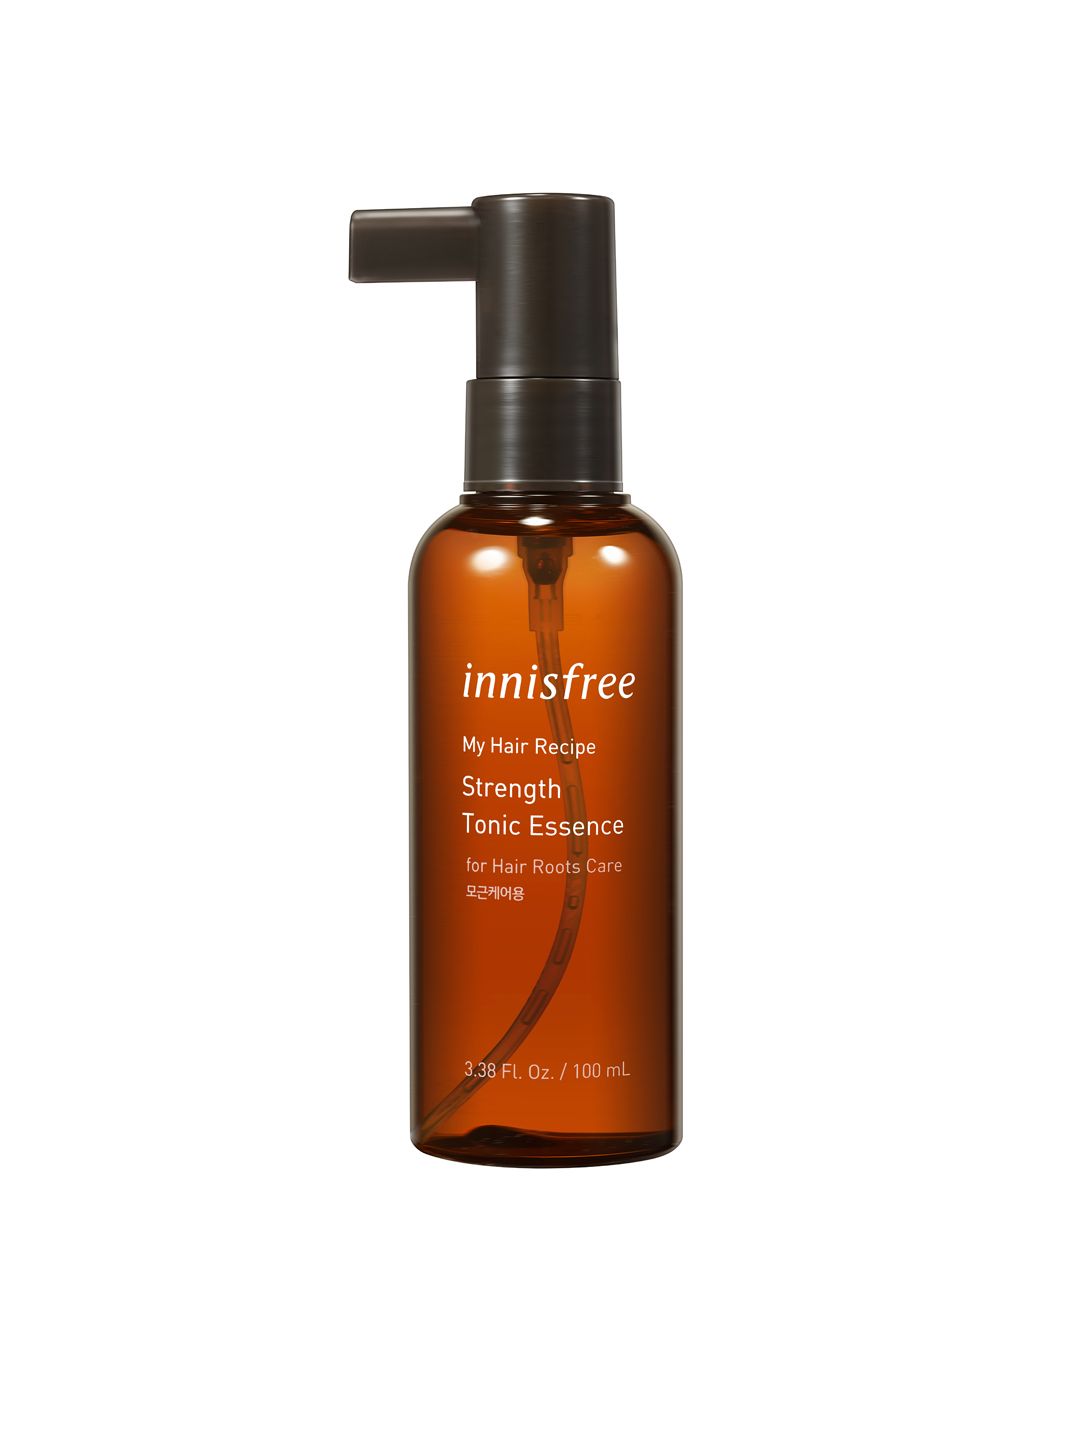 Innisfree My Hair Recipe Strength Tonic Essence for Hair Roots Care - 330 ml Price in India